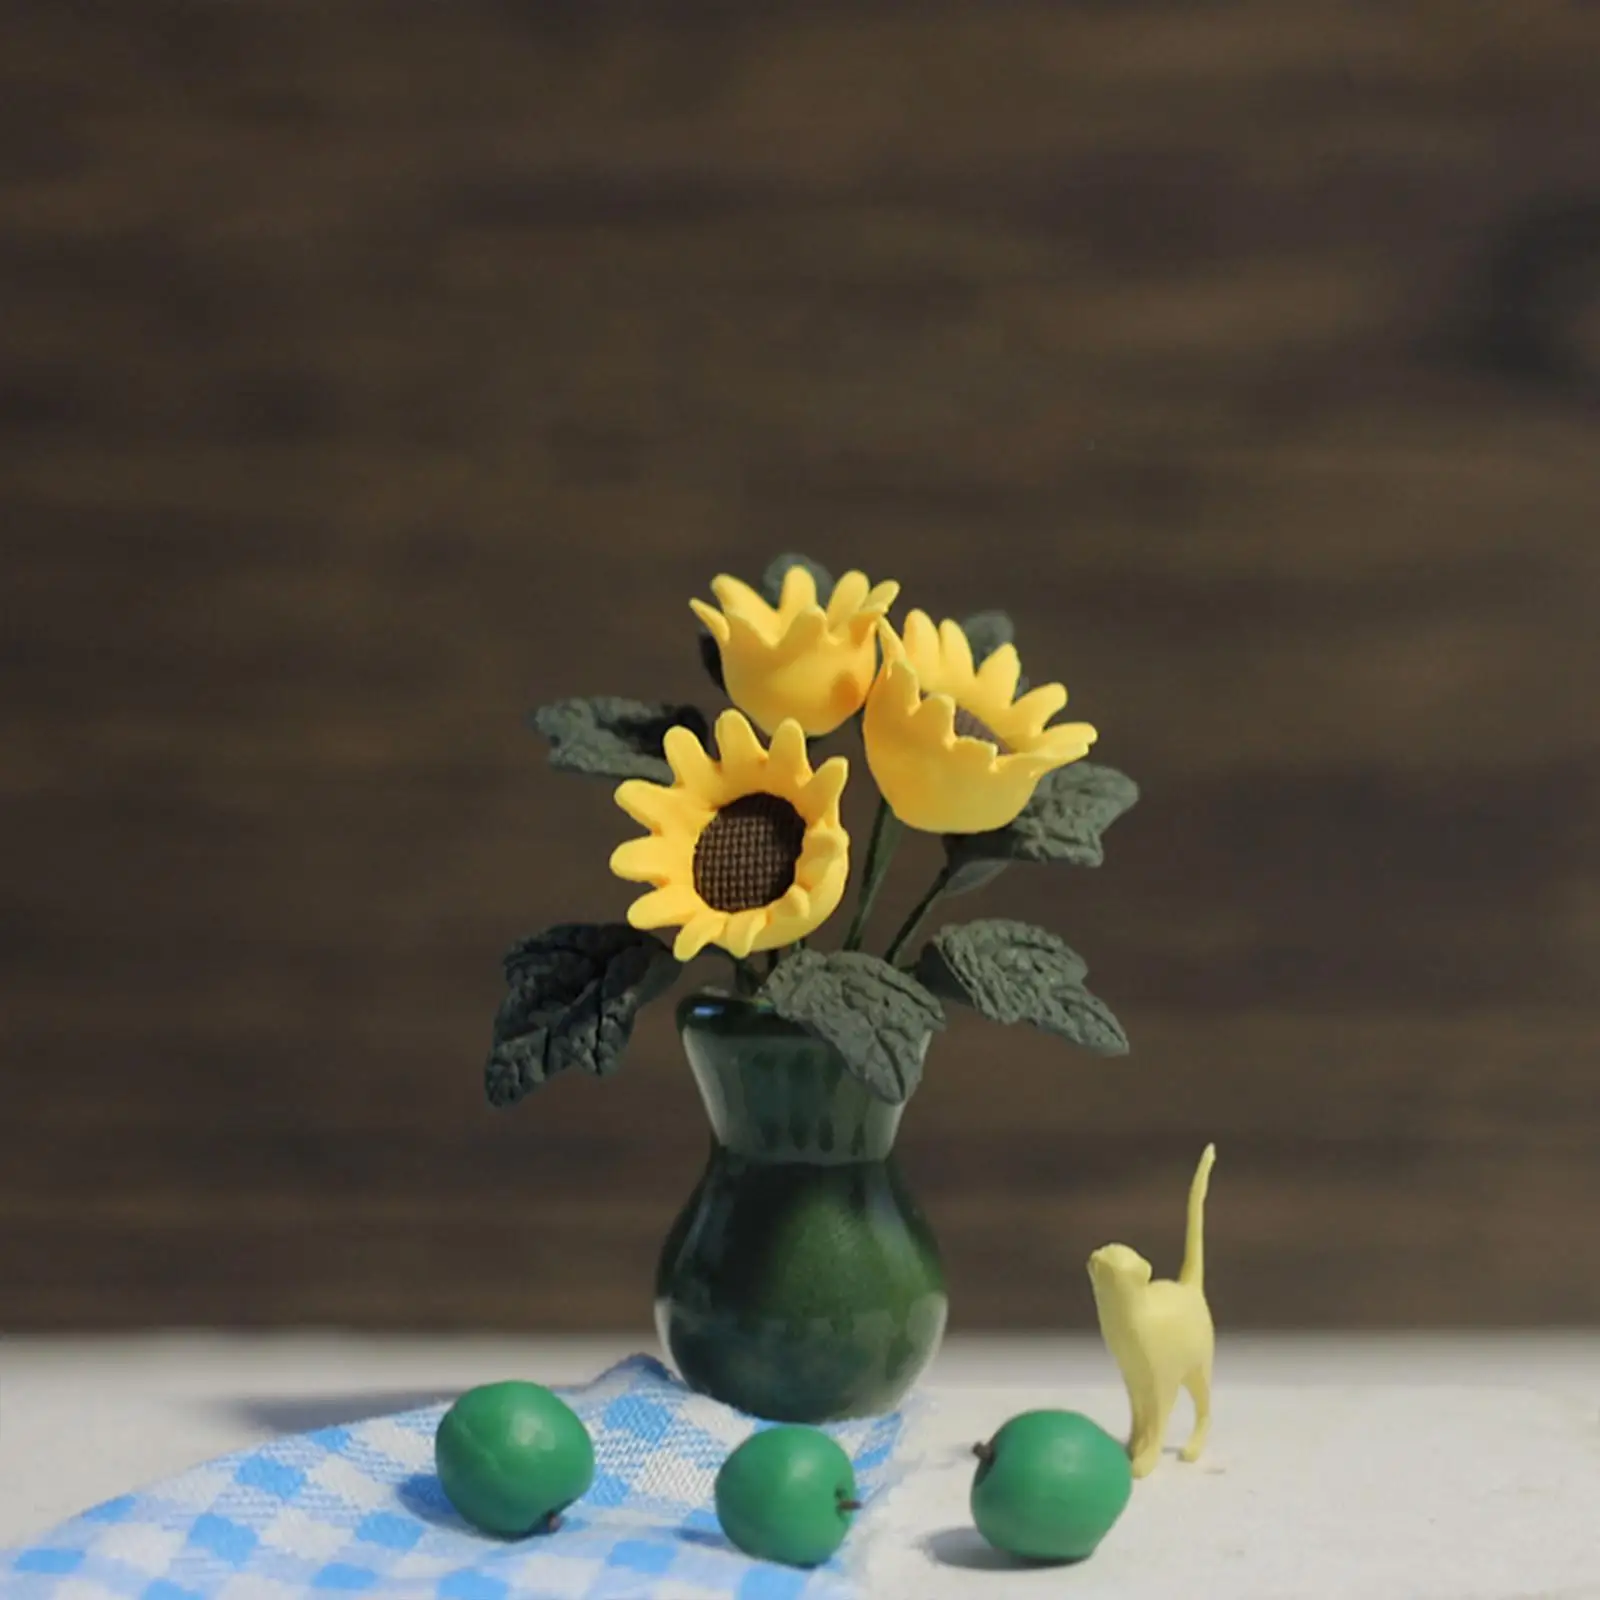 1/12 Dollhouse Sunflowes Pretend Play Tiny Bonsai Model Dollhouse Potted Flowers for Dollhouse Accessories Ornaments Gift